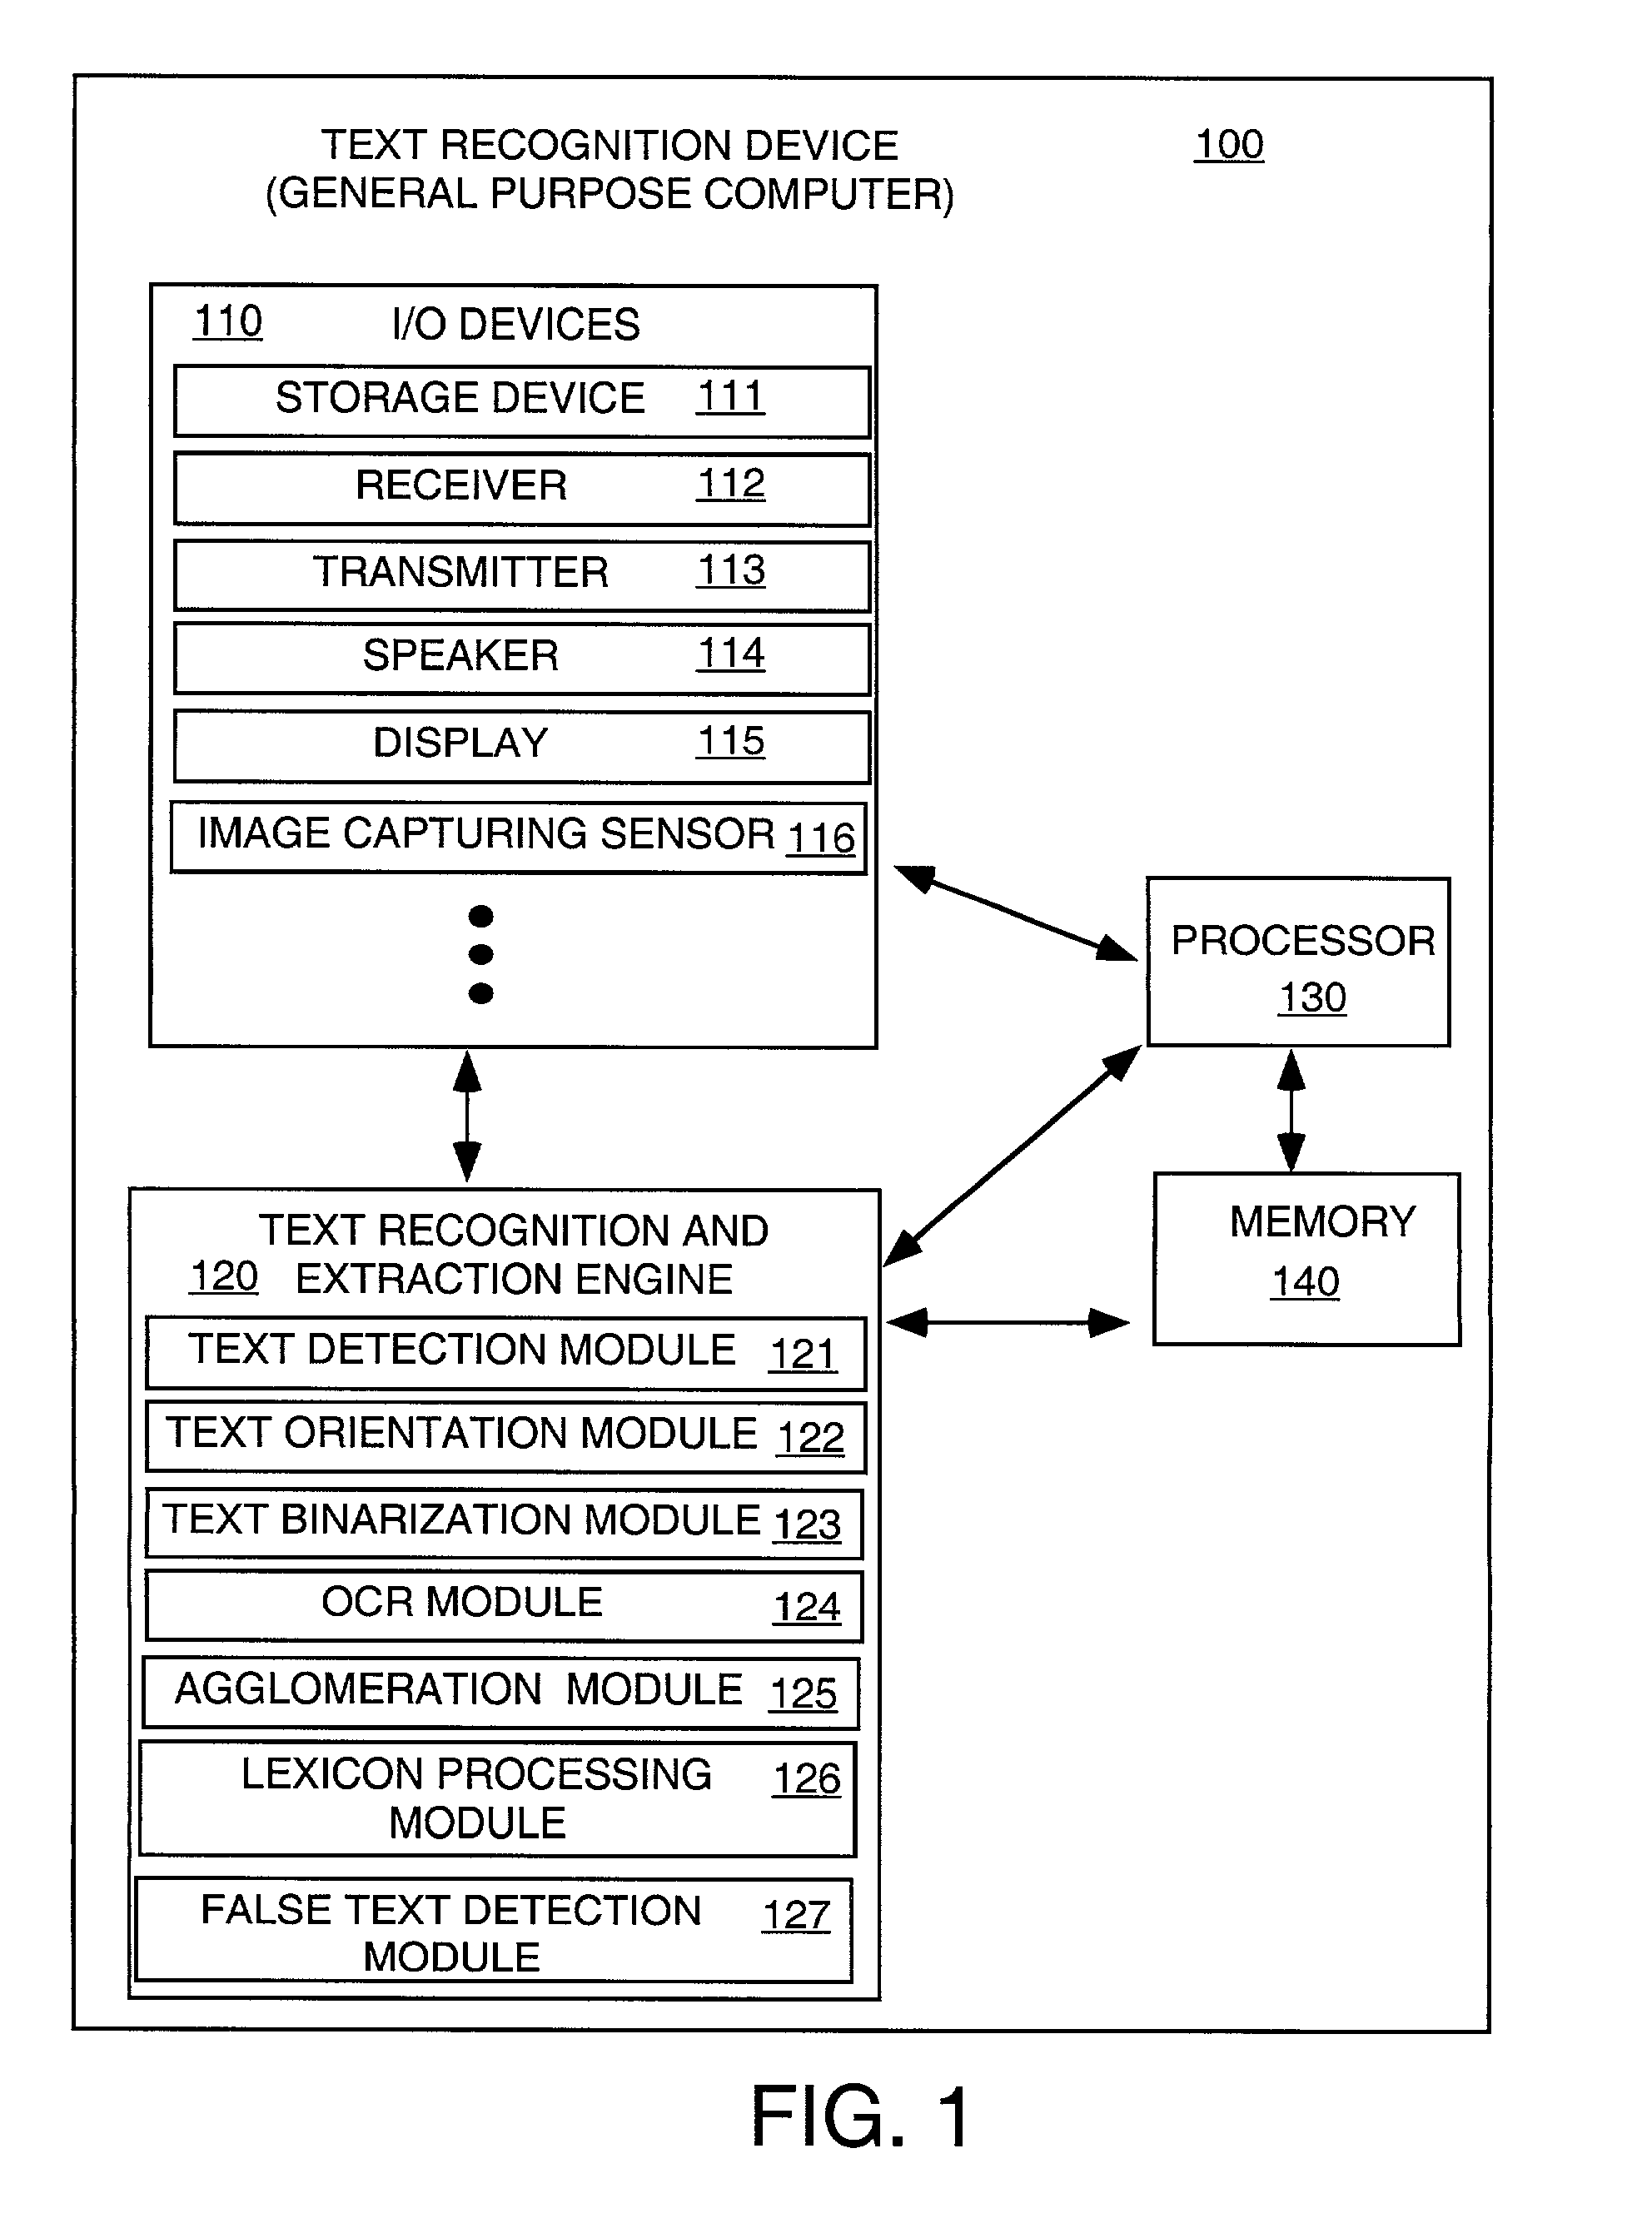 Method and apparatus for recognizing text in an image sequence of scene imagery